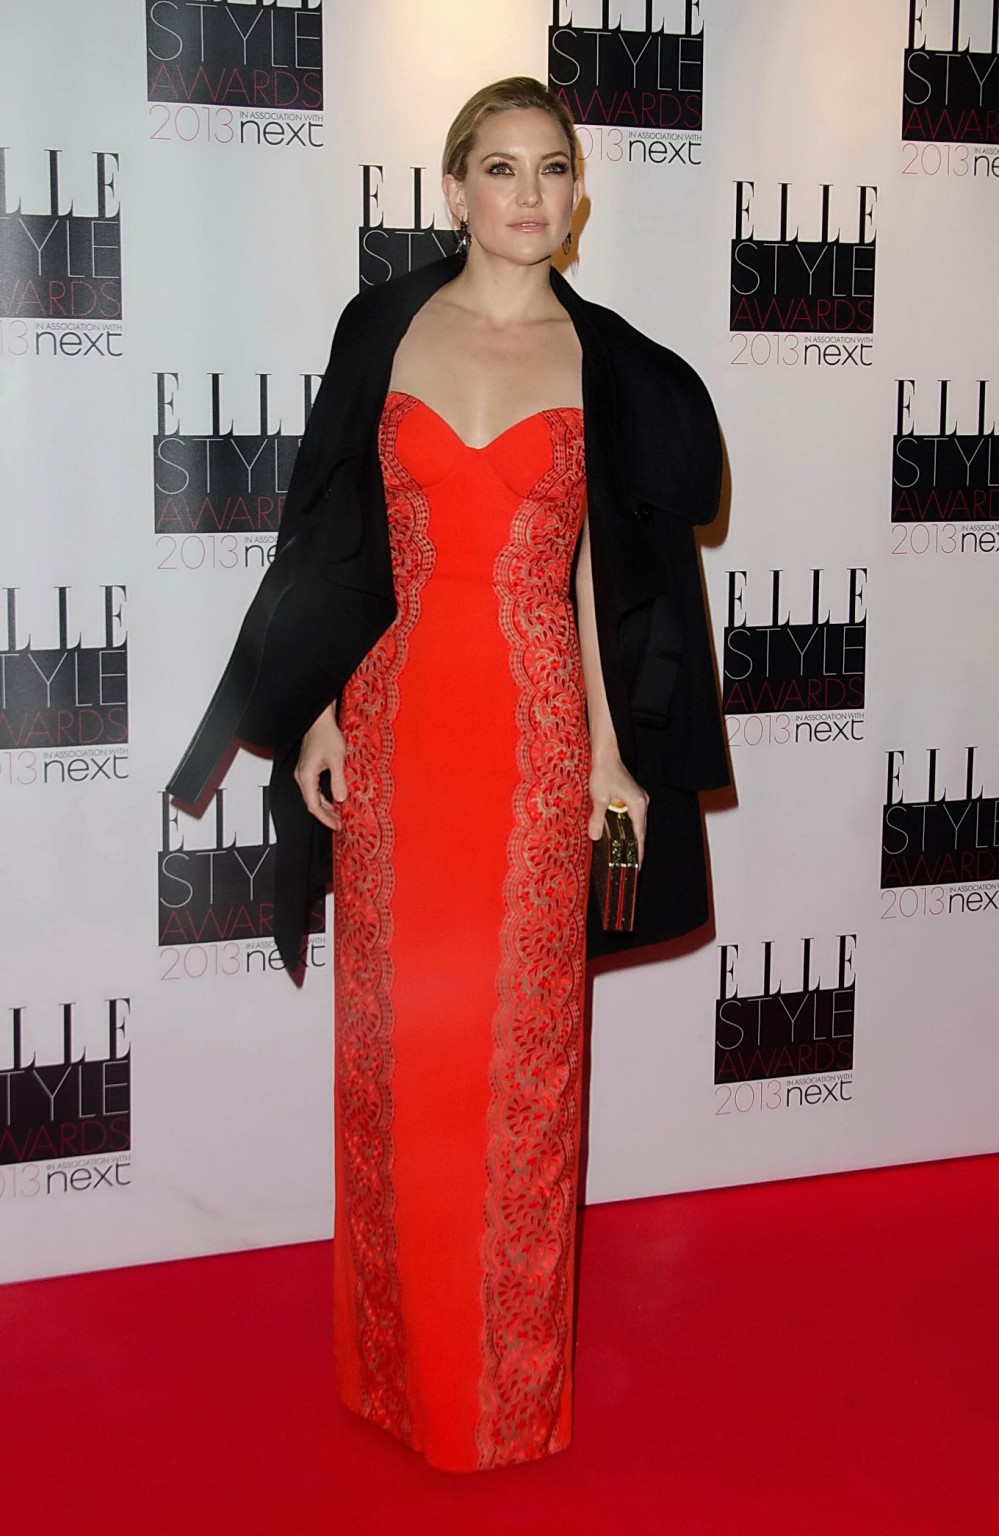 Kate Hudson showing huge cleavage in a red bare back maxi dress at the Elle Styl #75241275